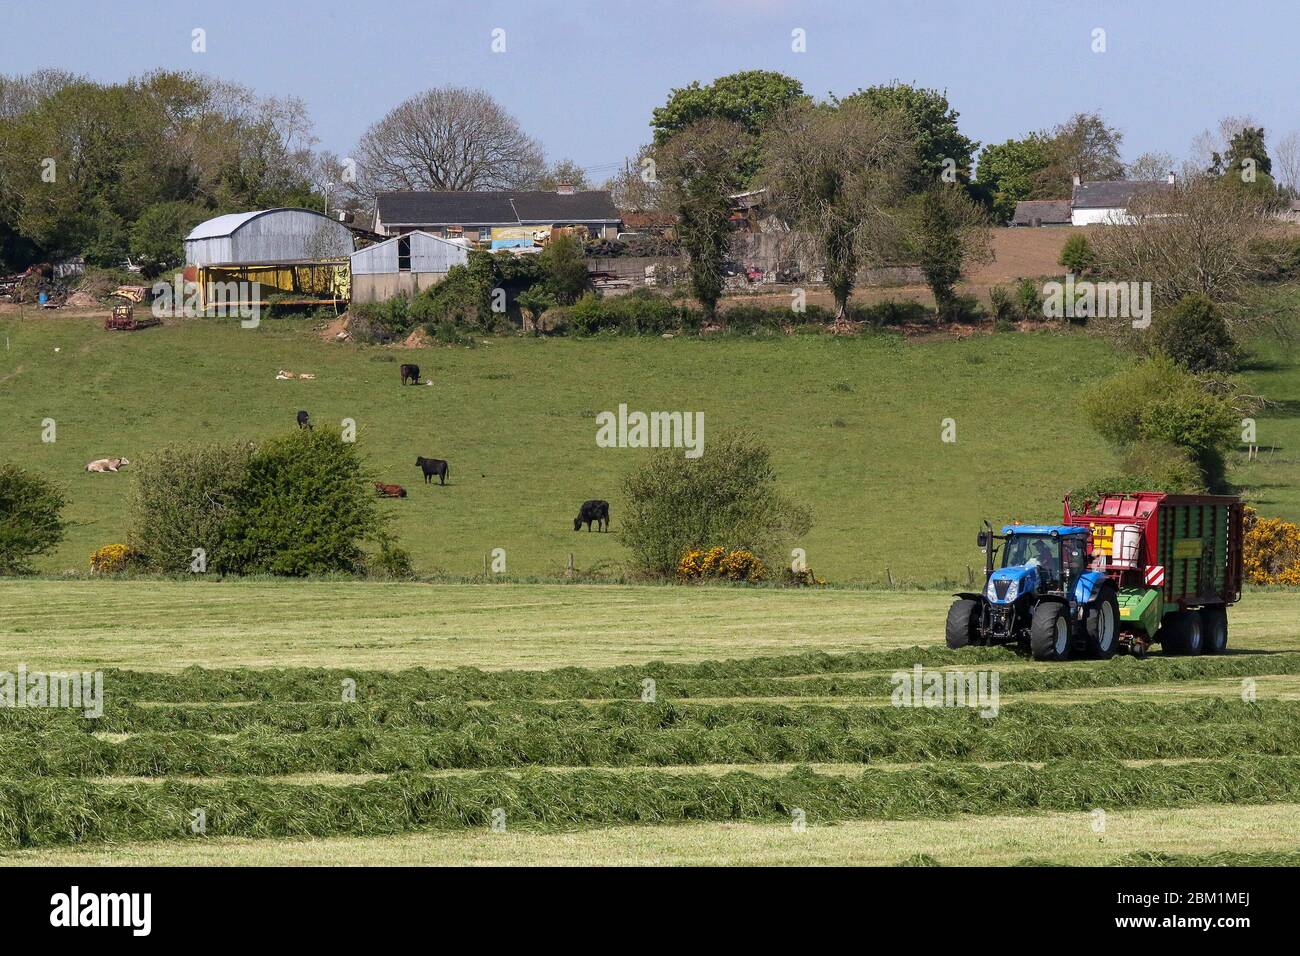 Magheralin, County Armagh, Northern Ireland. 06 May 2020. UK weather - bright blue sky and sunshine today as the execptional spell of dry spring weather continues. There will be some rain overnight before dry and cooler weather returns over the weekend. Tractor collecting cut grass in a sunny spring day. Credit: CAZIMB/Alamy Live News. Stock Photo